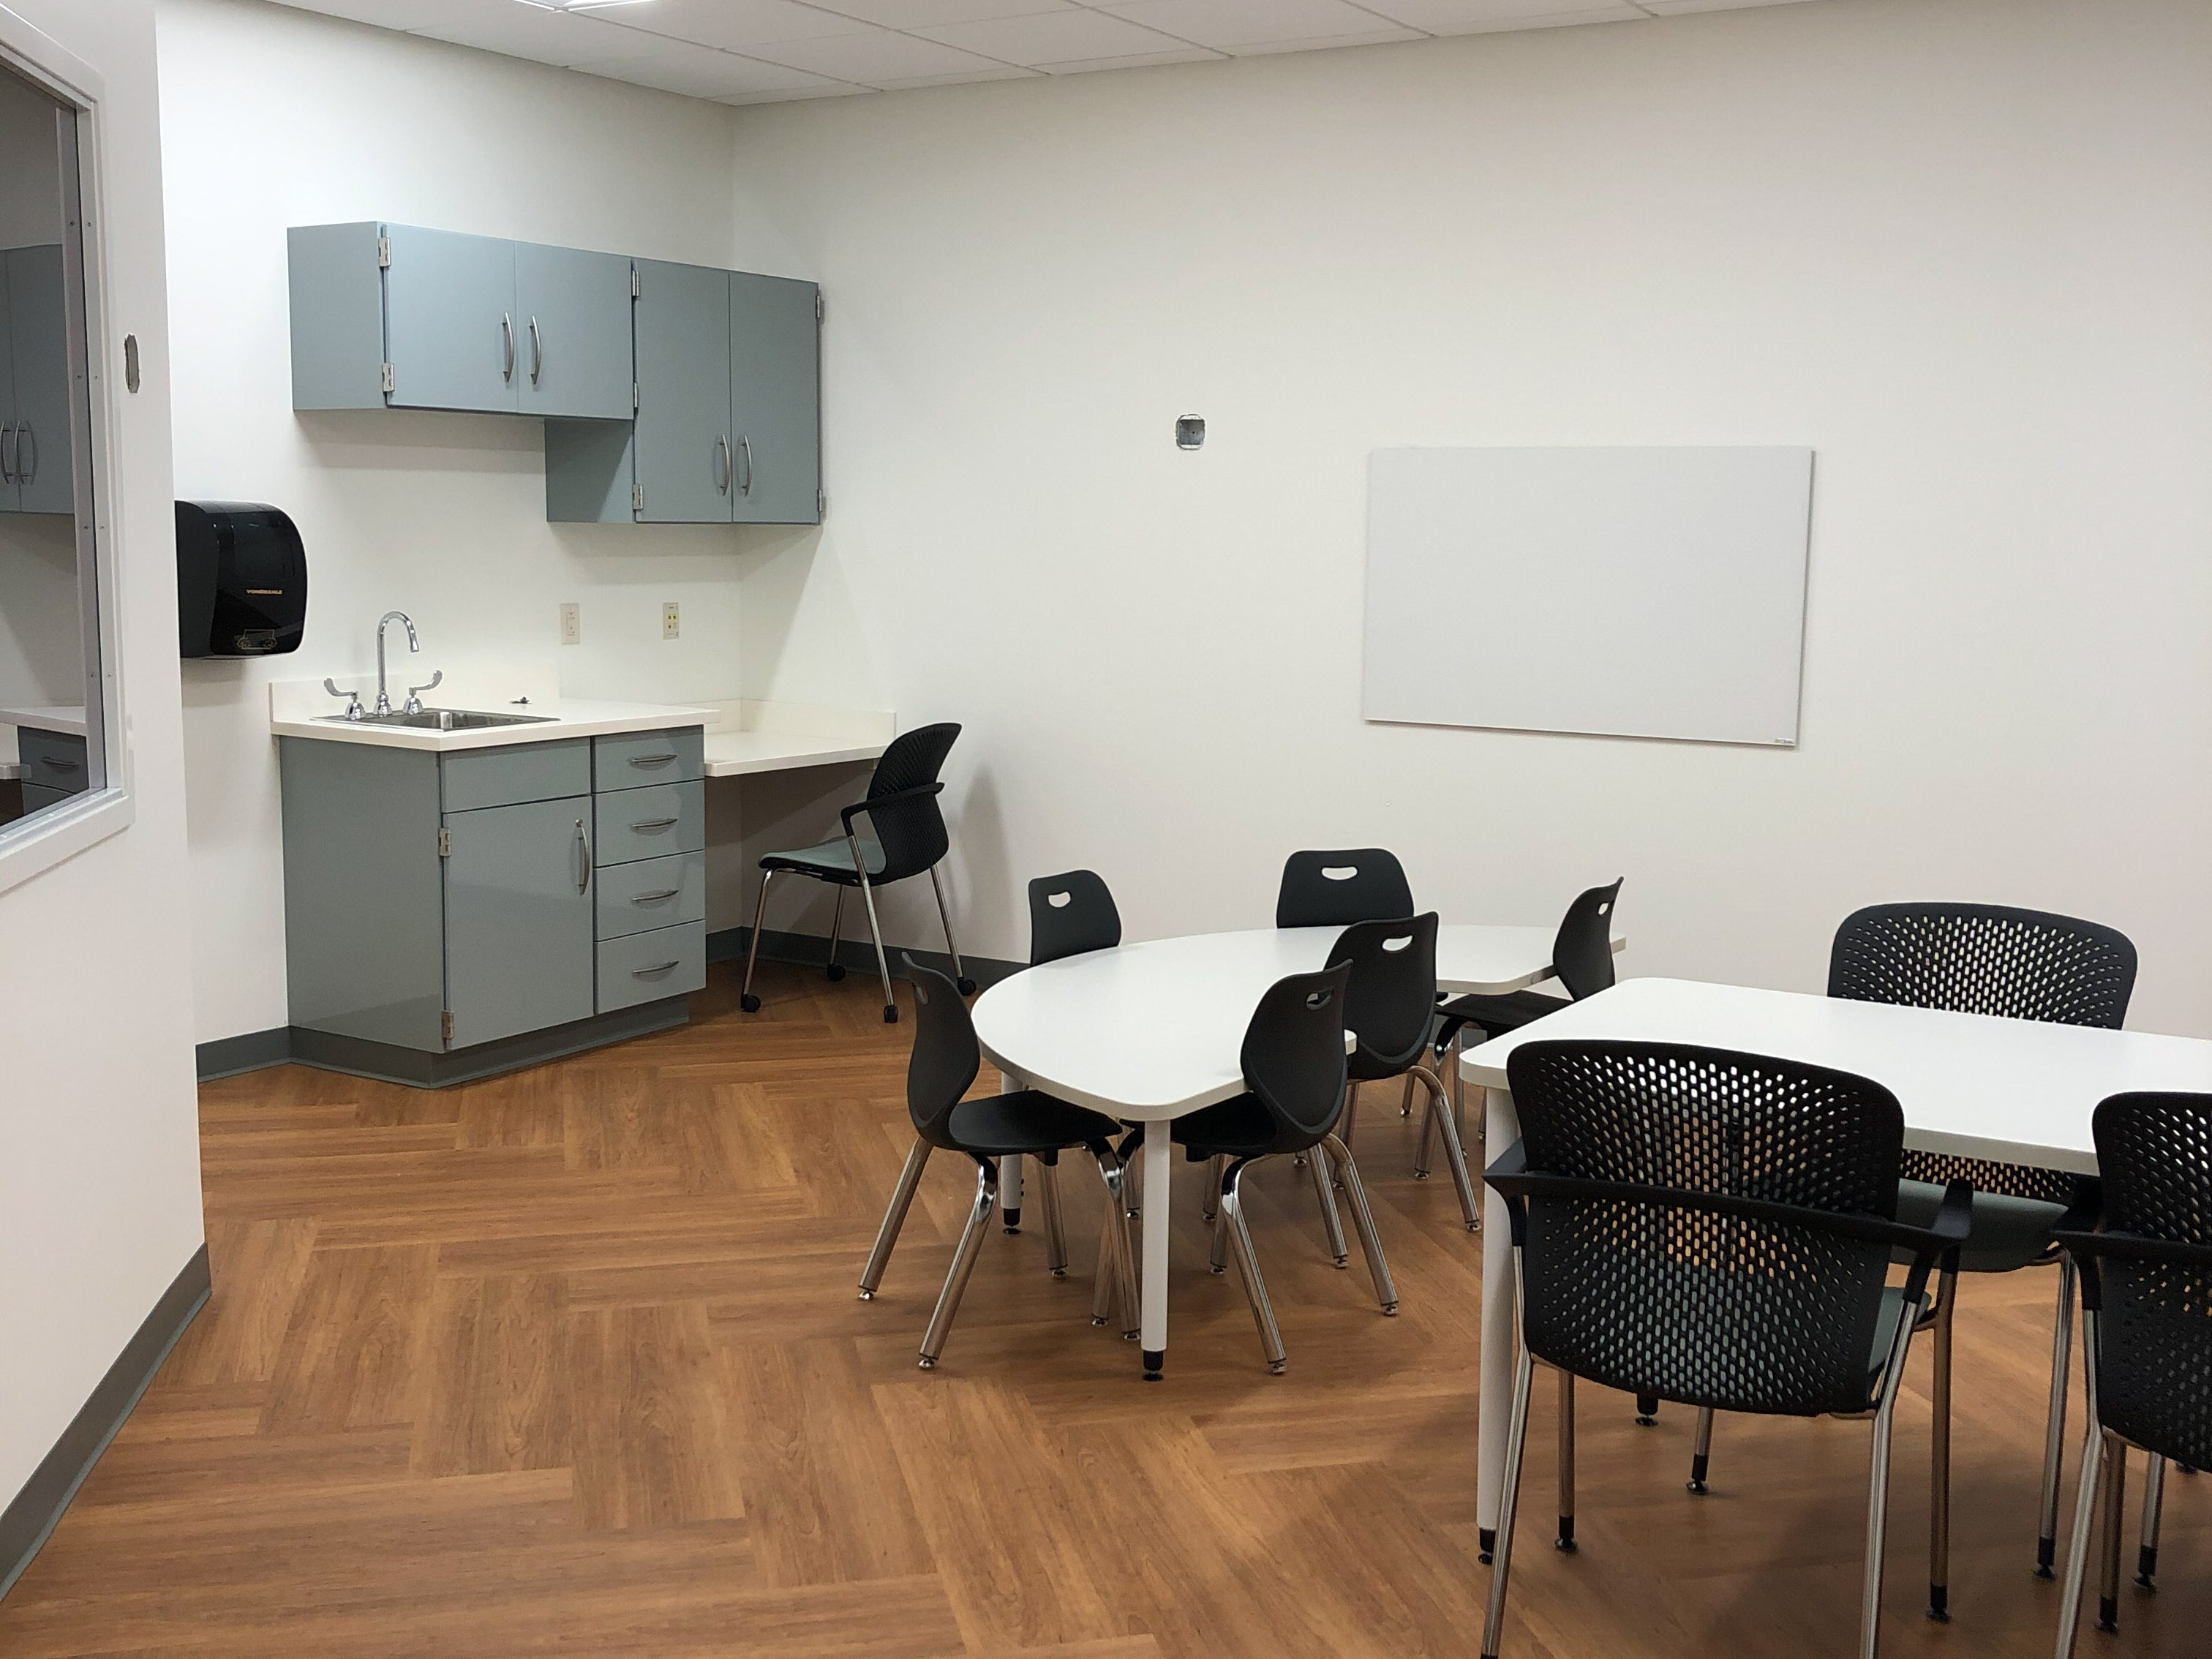 A small group area with tables and chairs at the ASP clinic space.